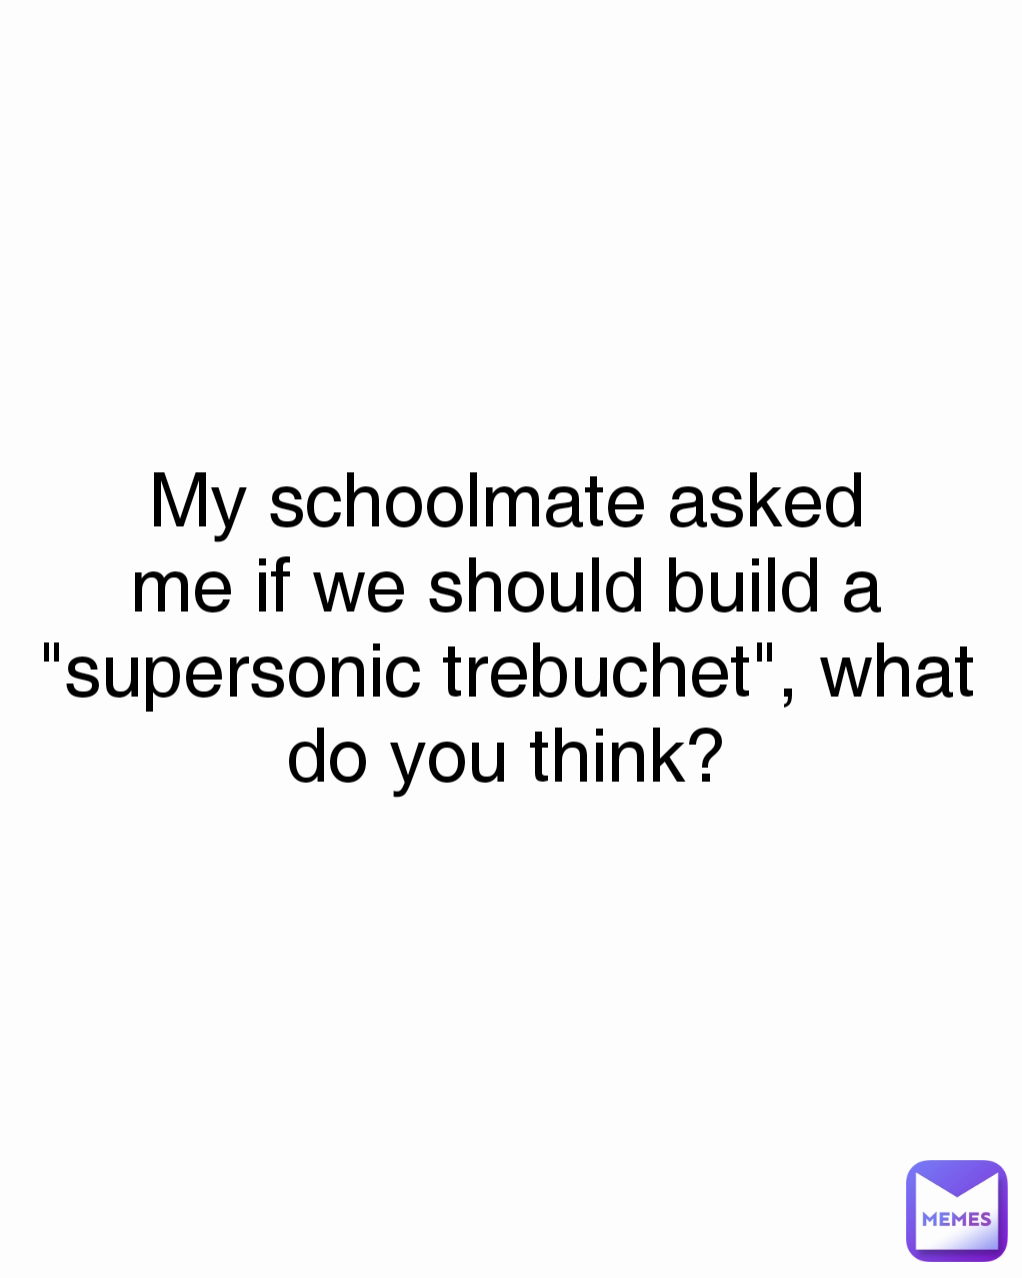 My schoolmate asked me if we should build a "supersonic trebuchet", what do you think?